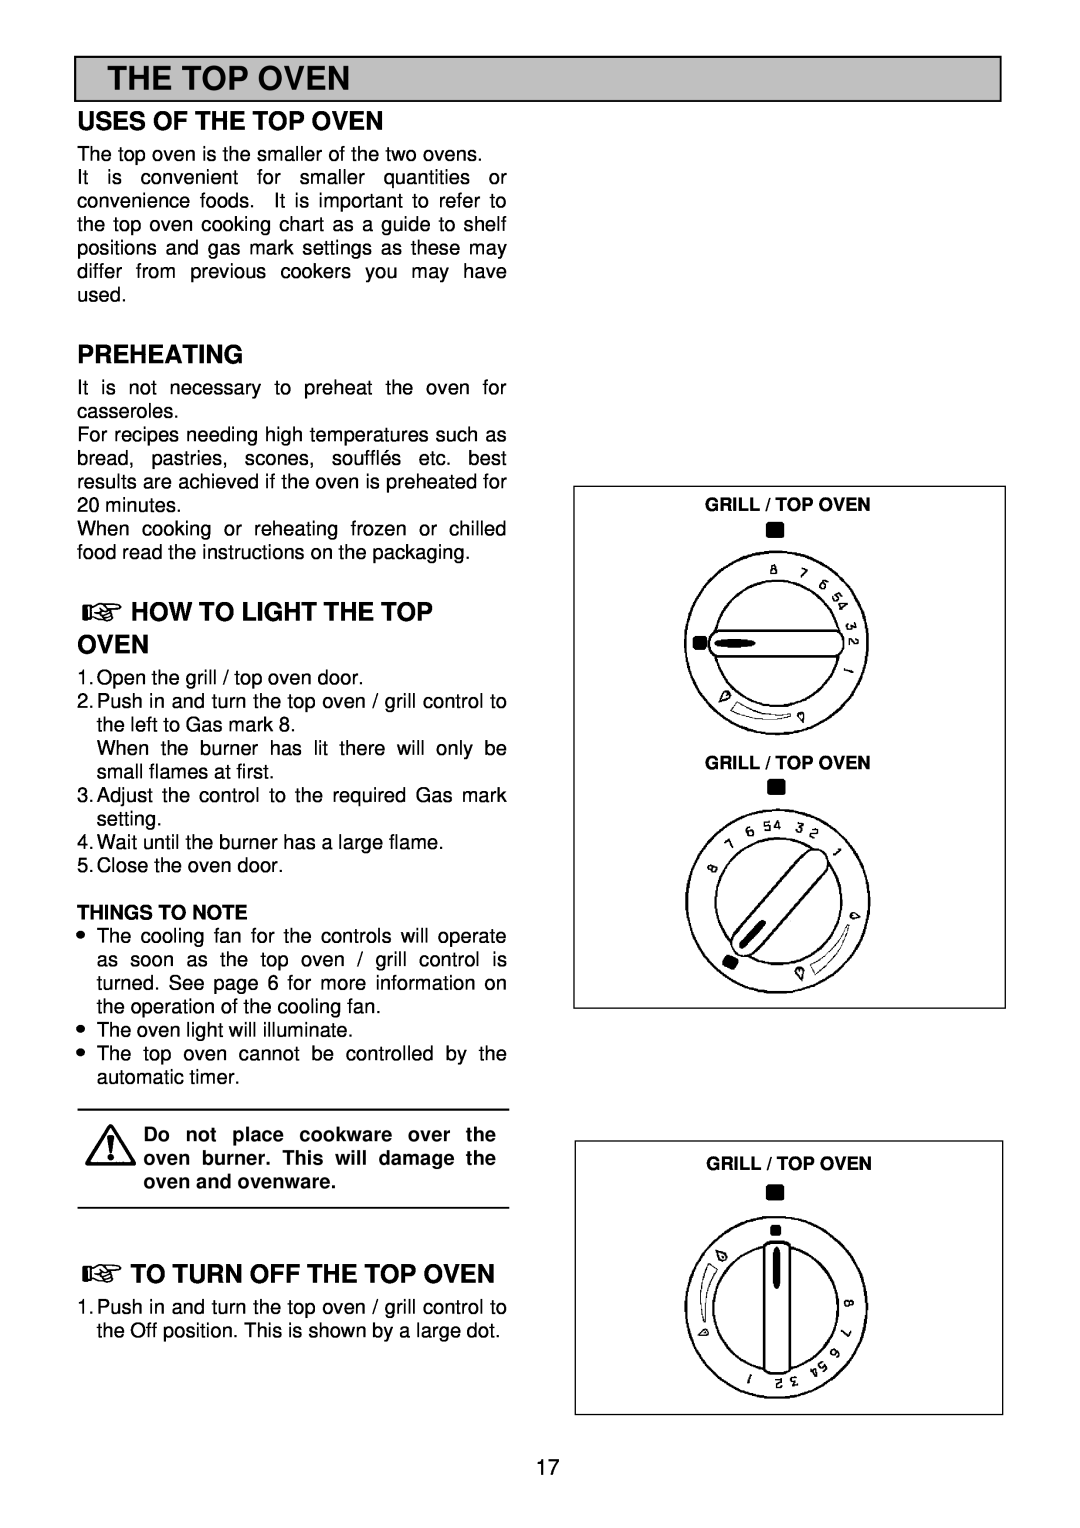 Electrolux EDB 876 manual Uses Of The Top Oven, Preheating, How To Light The Top Oven, To Turn Off The Top Oven 